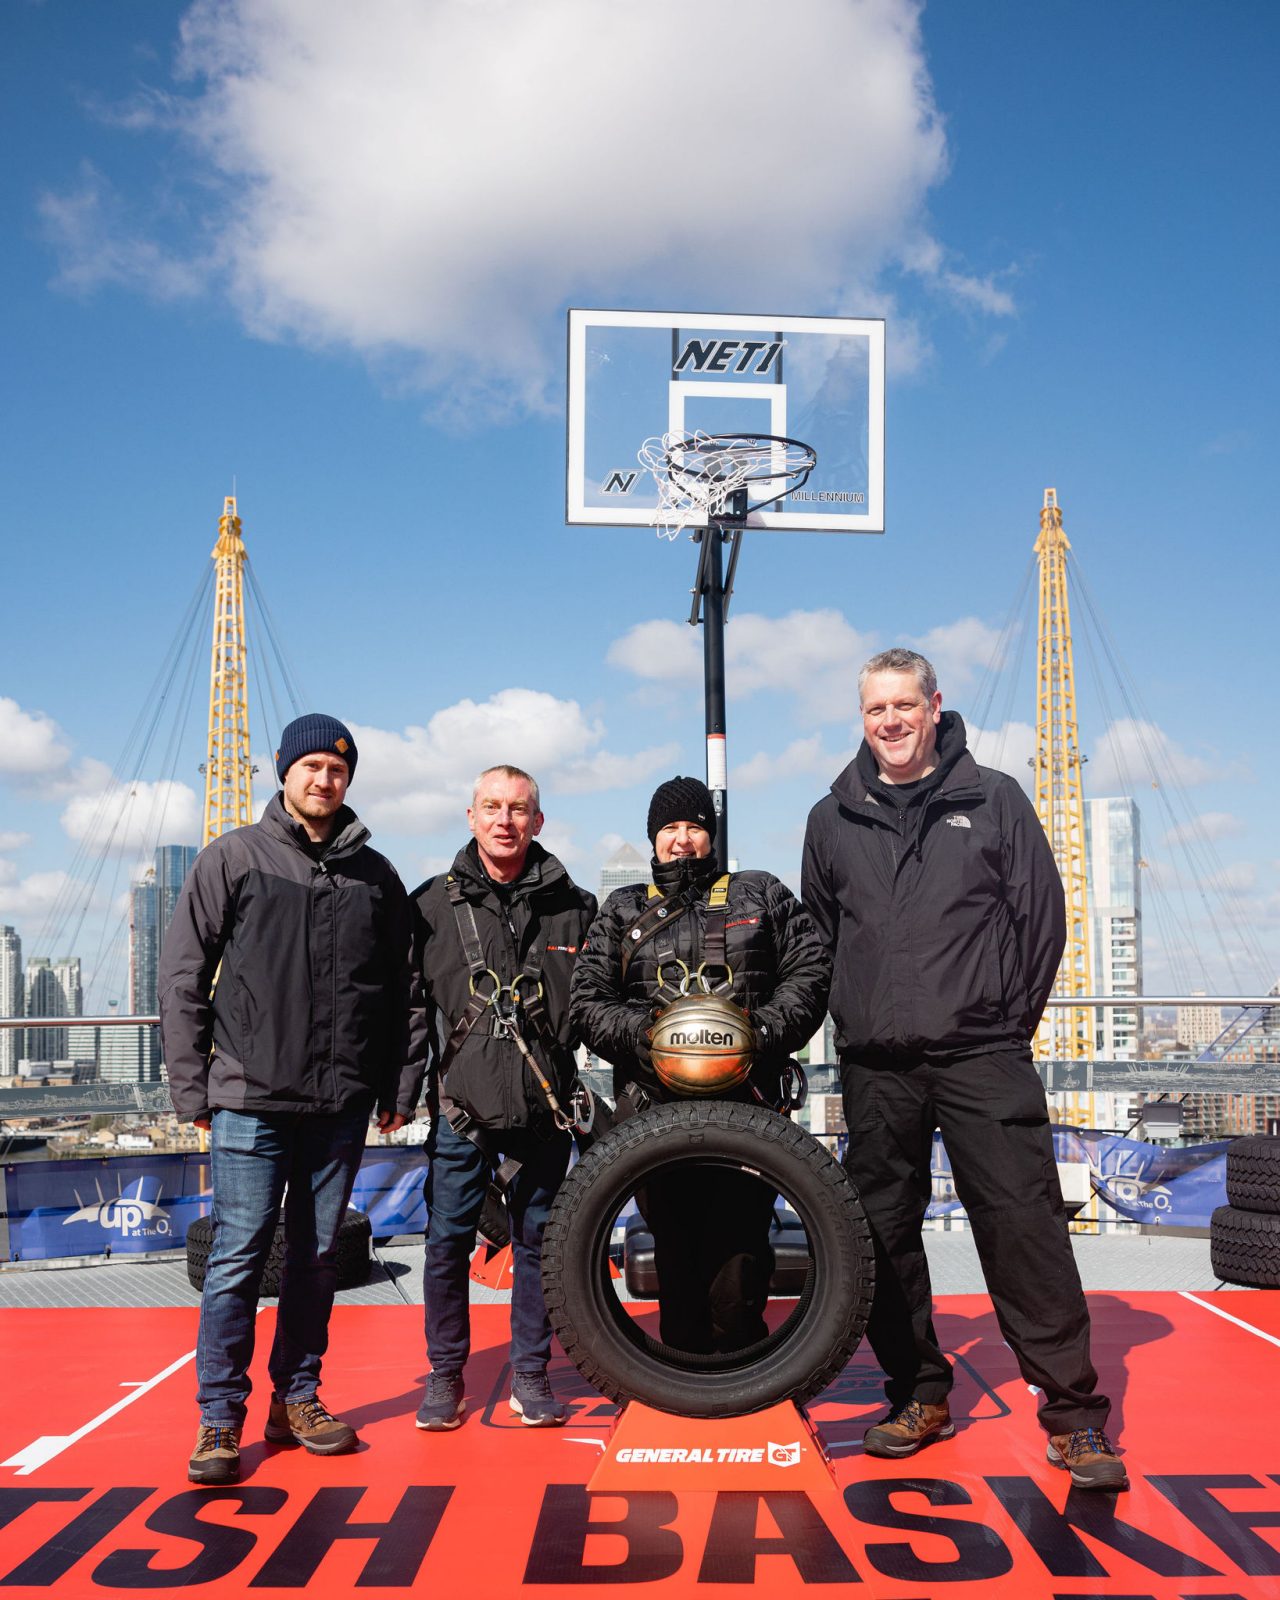 British Basketball League and General Tire